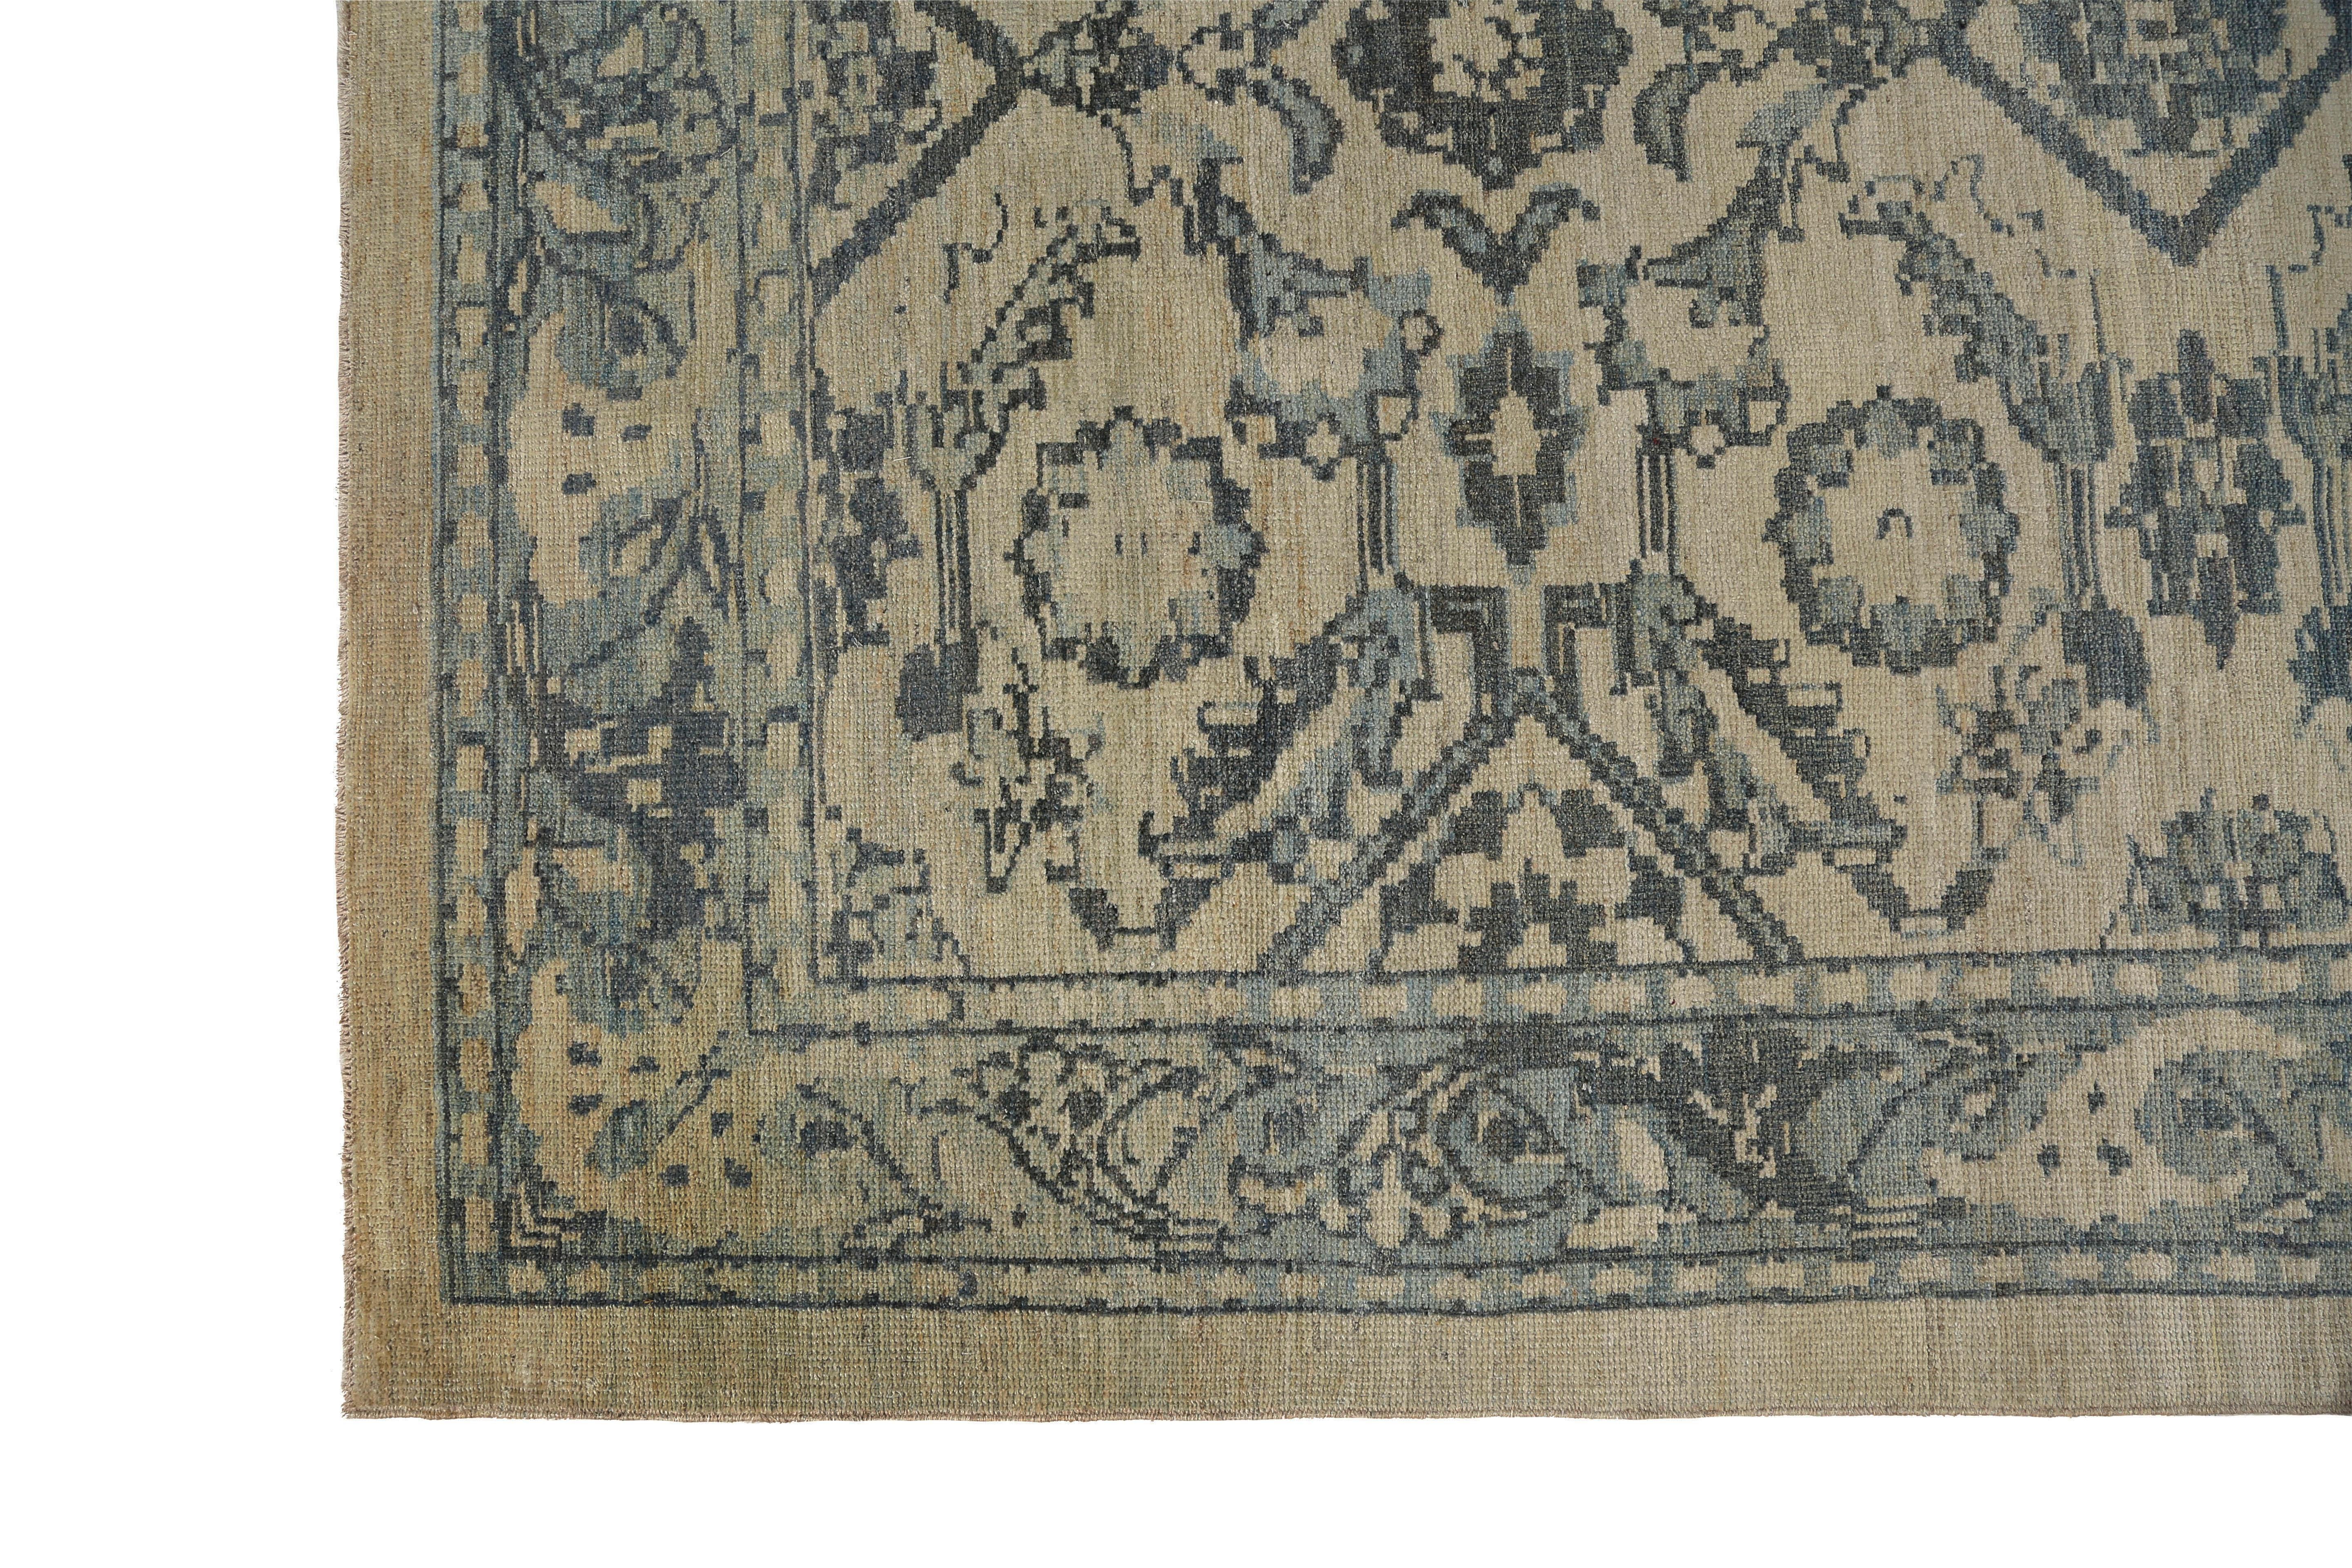 Introducing our handmade Turkish Oushak rug in the size of 6'1'' by 8'9''. This exquisite rug features a stunning grey background with intricate blue tones in the design. Each rug is carefully crafted by skilled artisans using traditional techniques